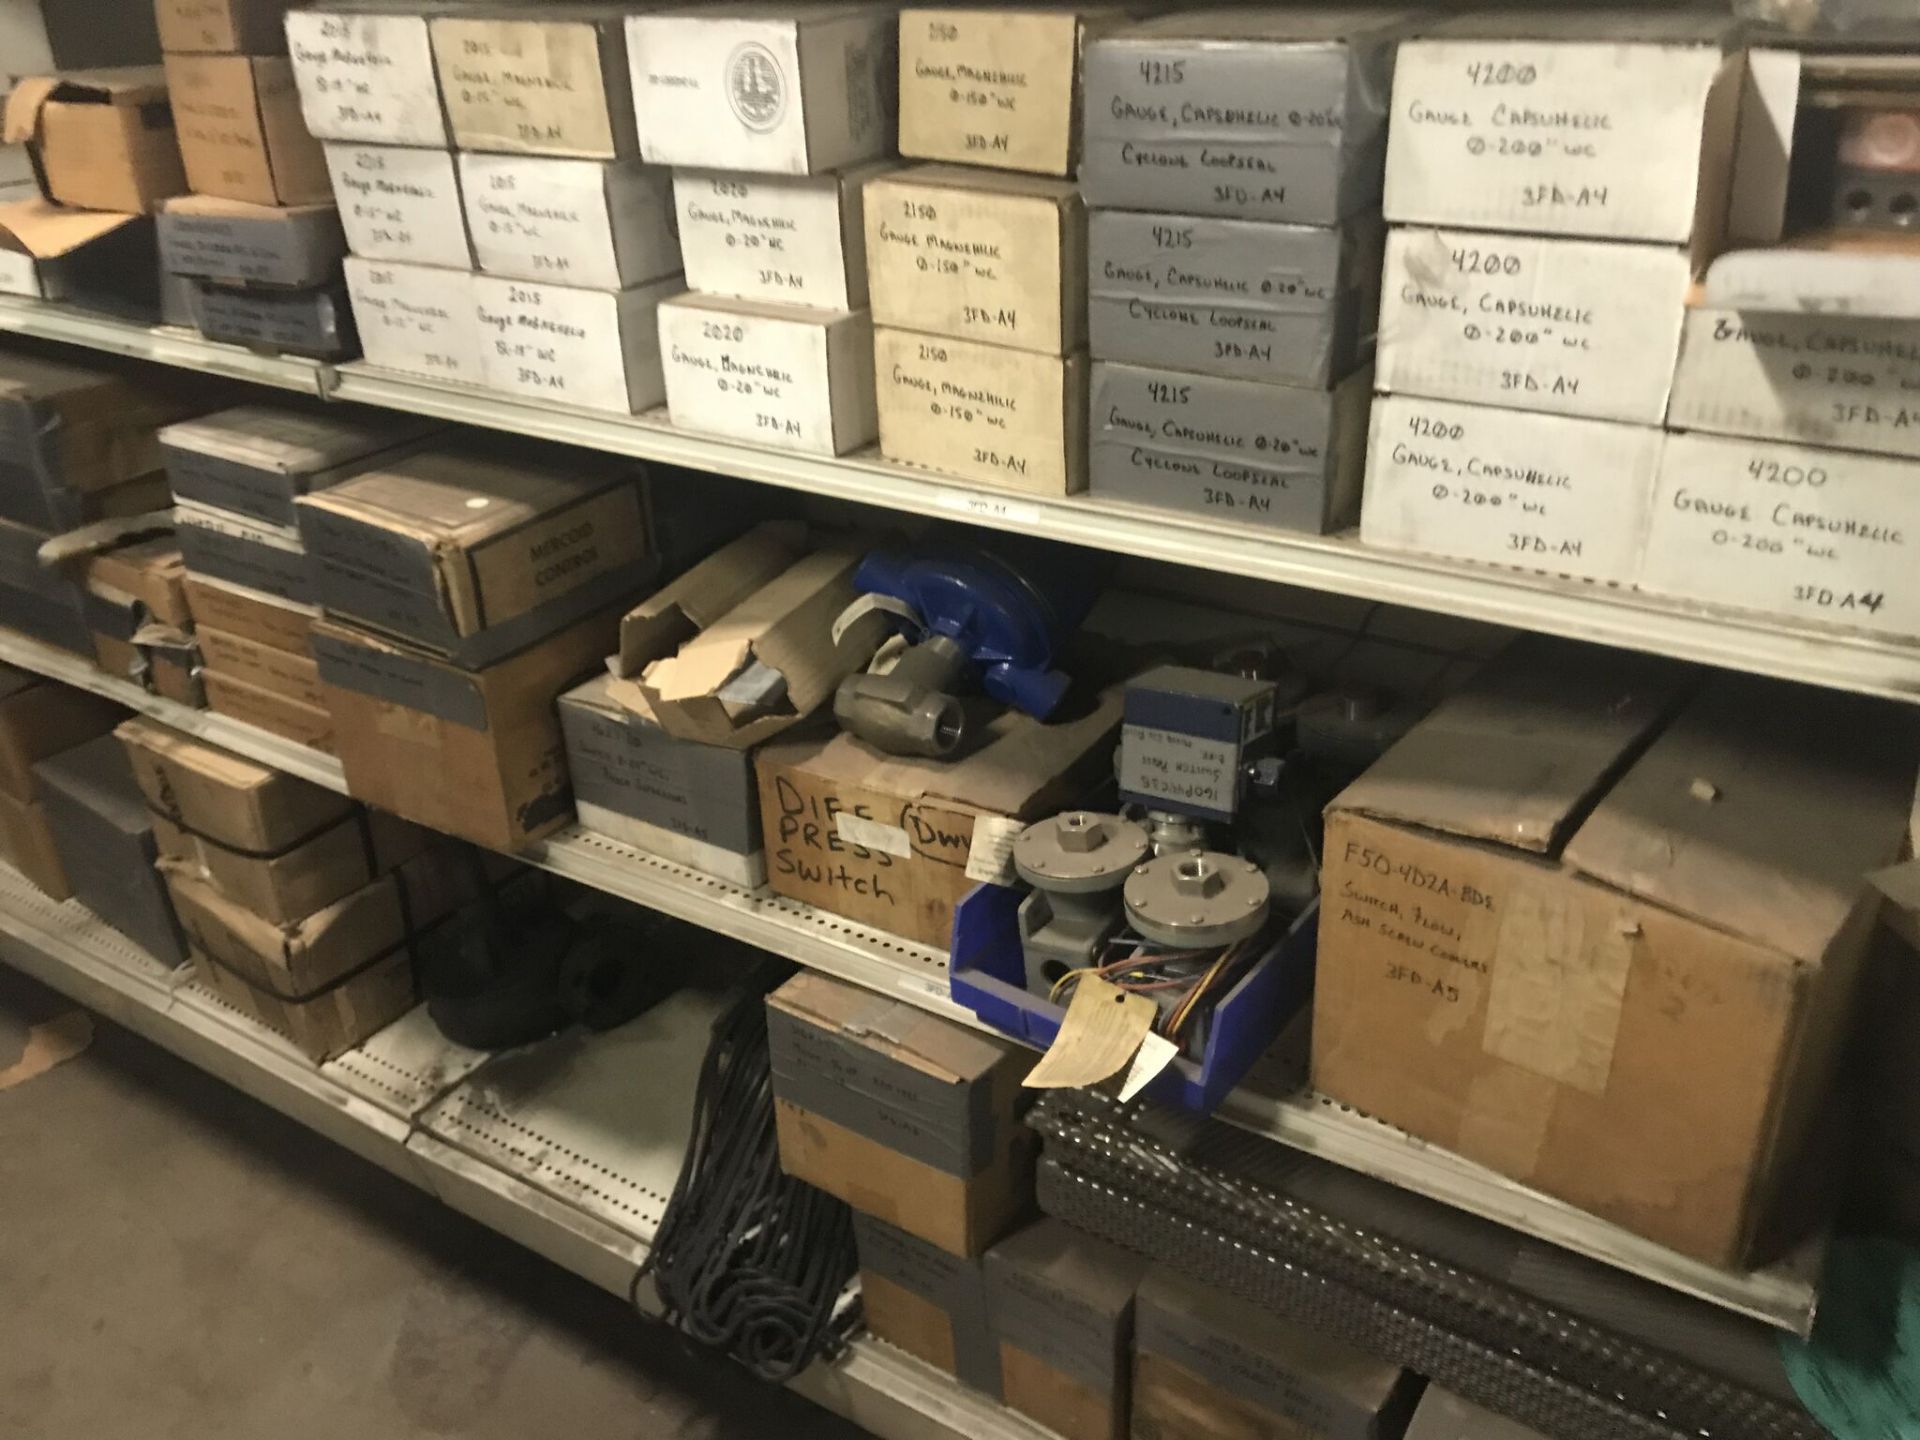 Shelving w/ Brakes, Motor Controllers, Electrical Components thermocouples, Thermoneters, Switches - Image 10 of 13